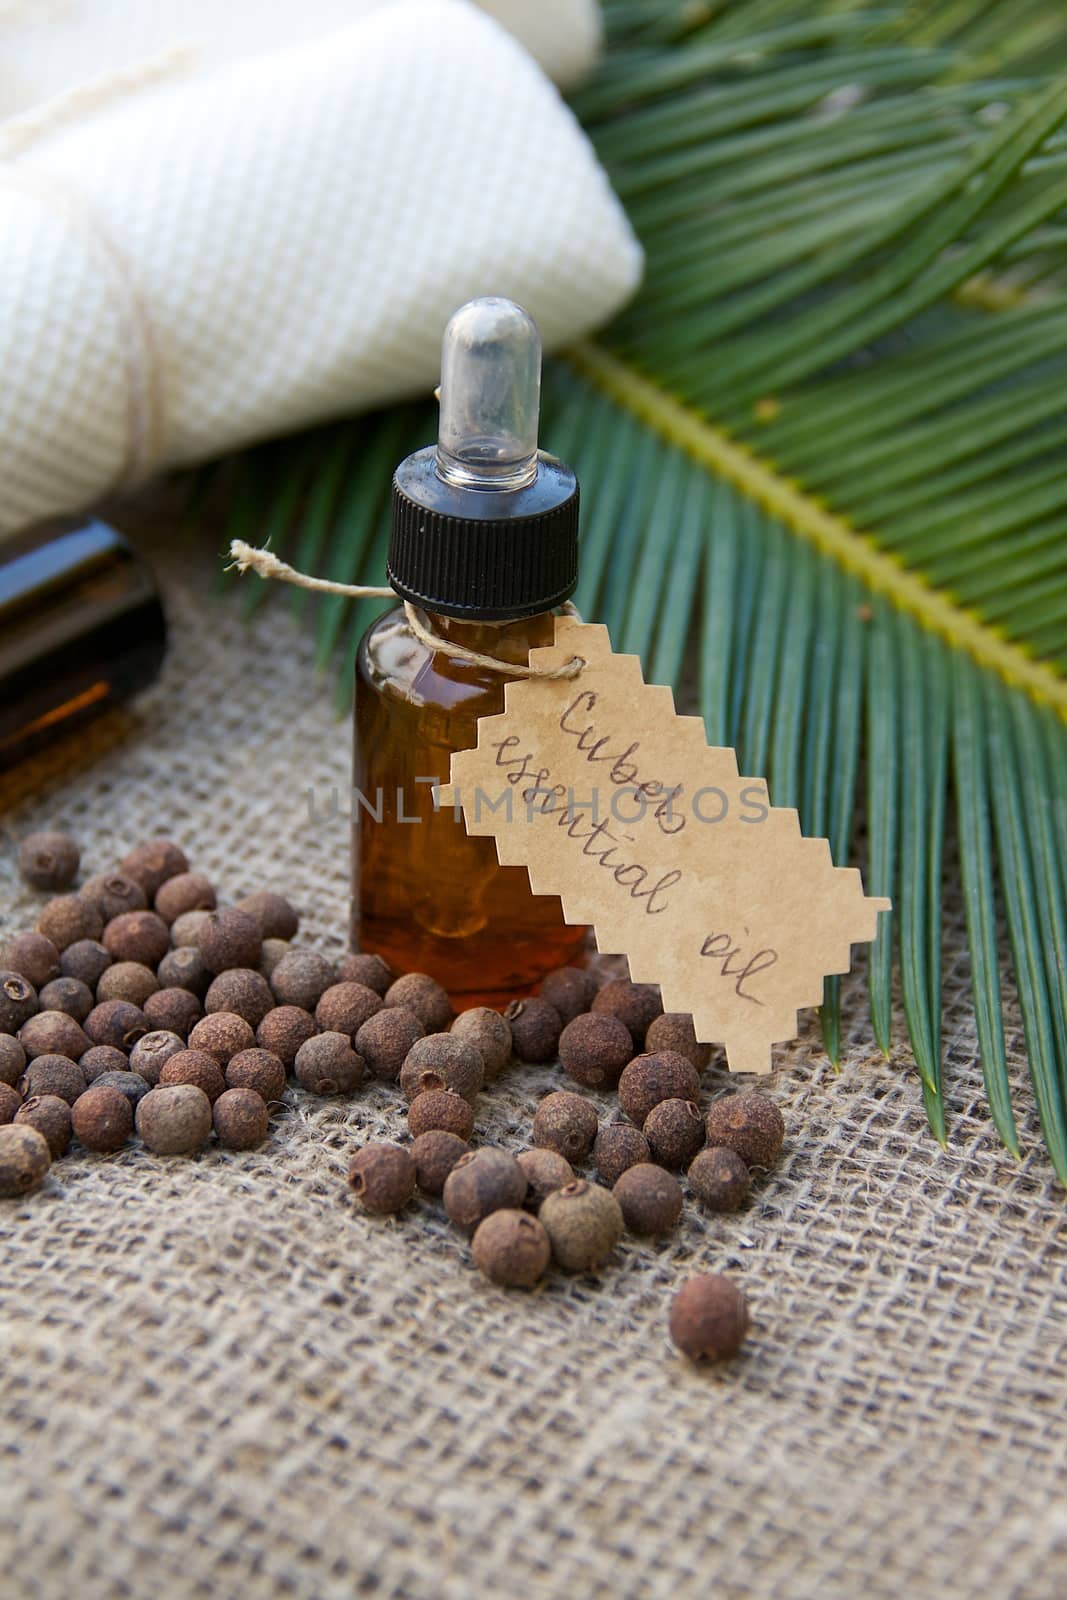 A bottle of cubeb essential oil on the sackcloth. Cubeb berries in the background